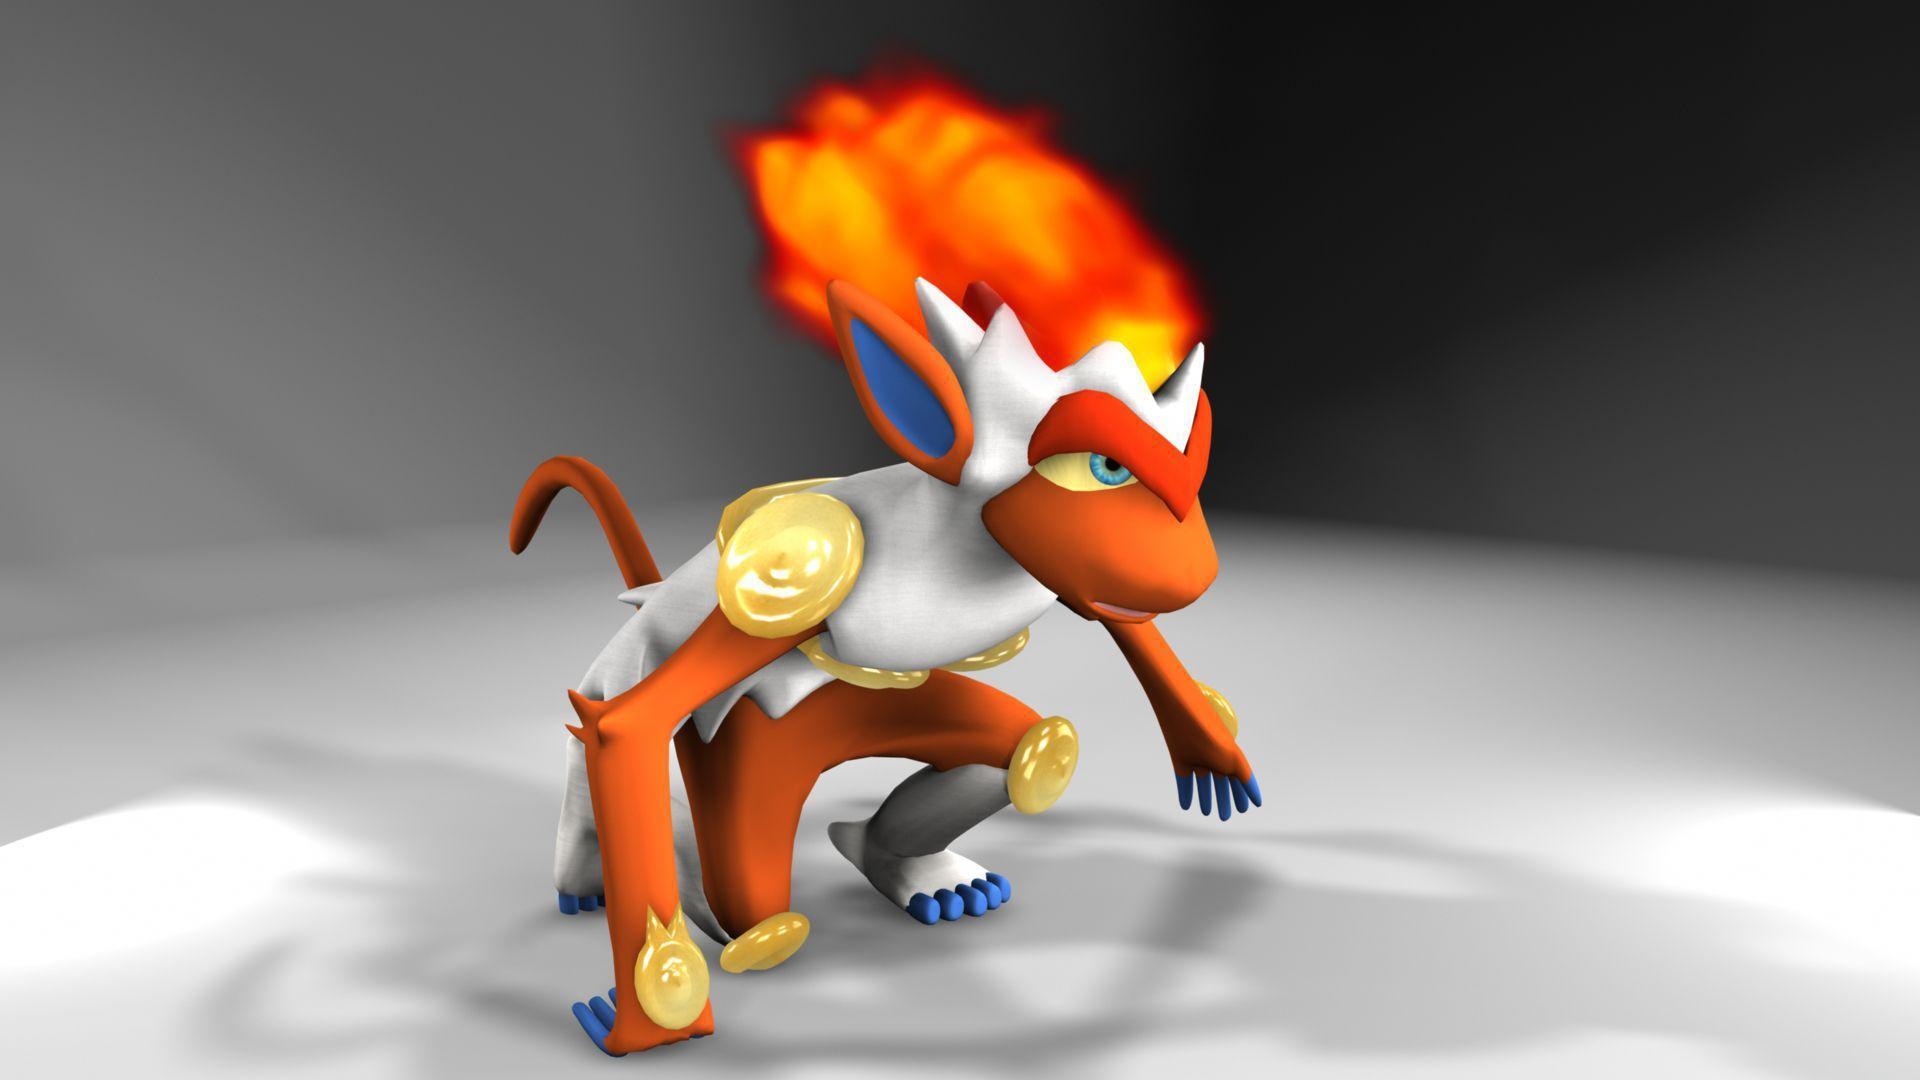 Infernape Wallpaper Image Photo Picture Background